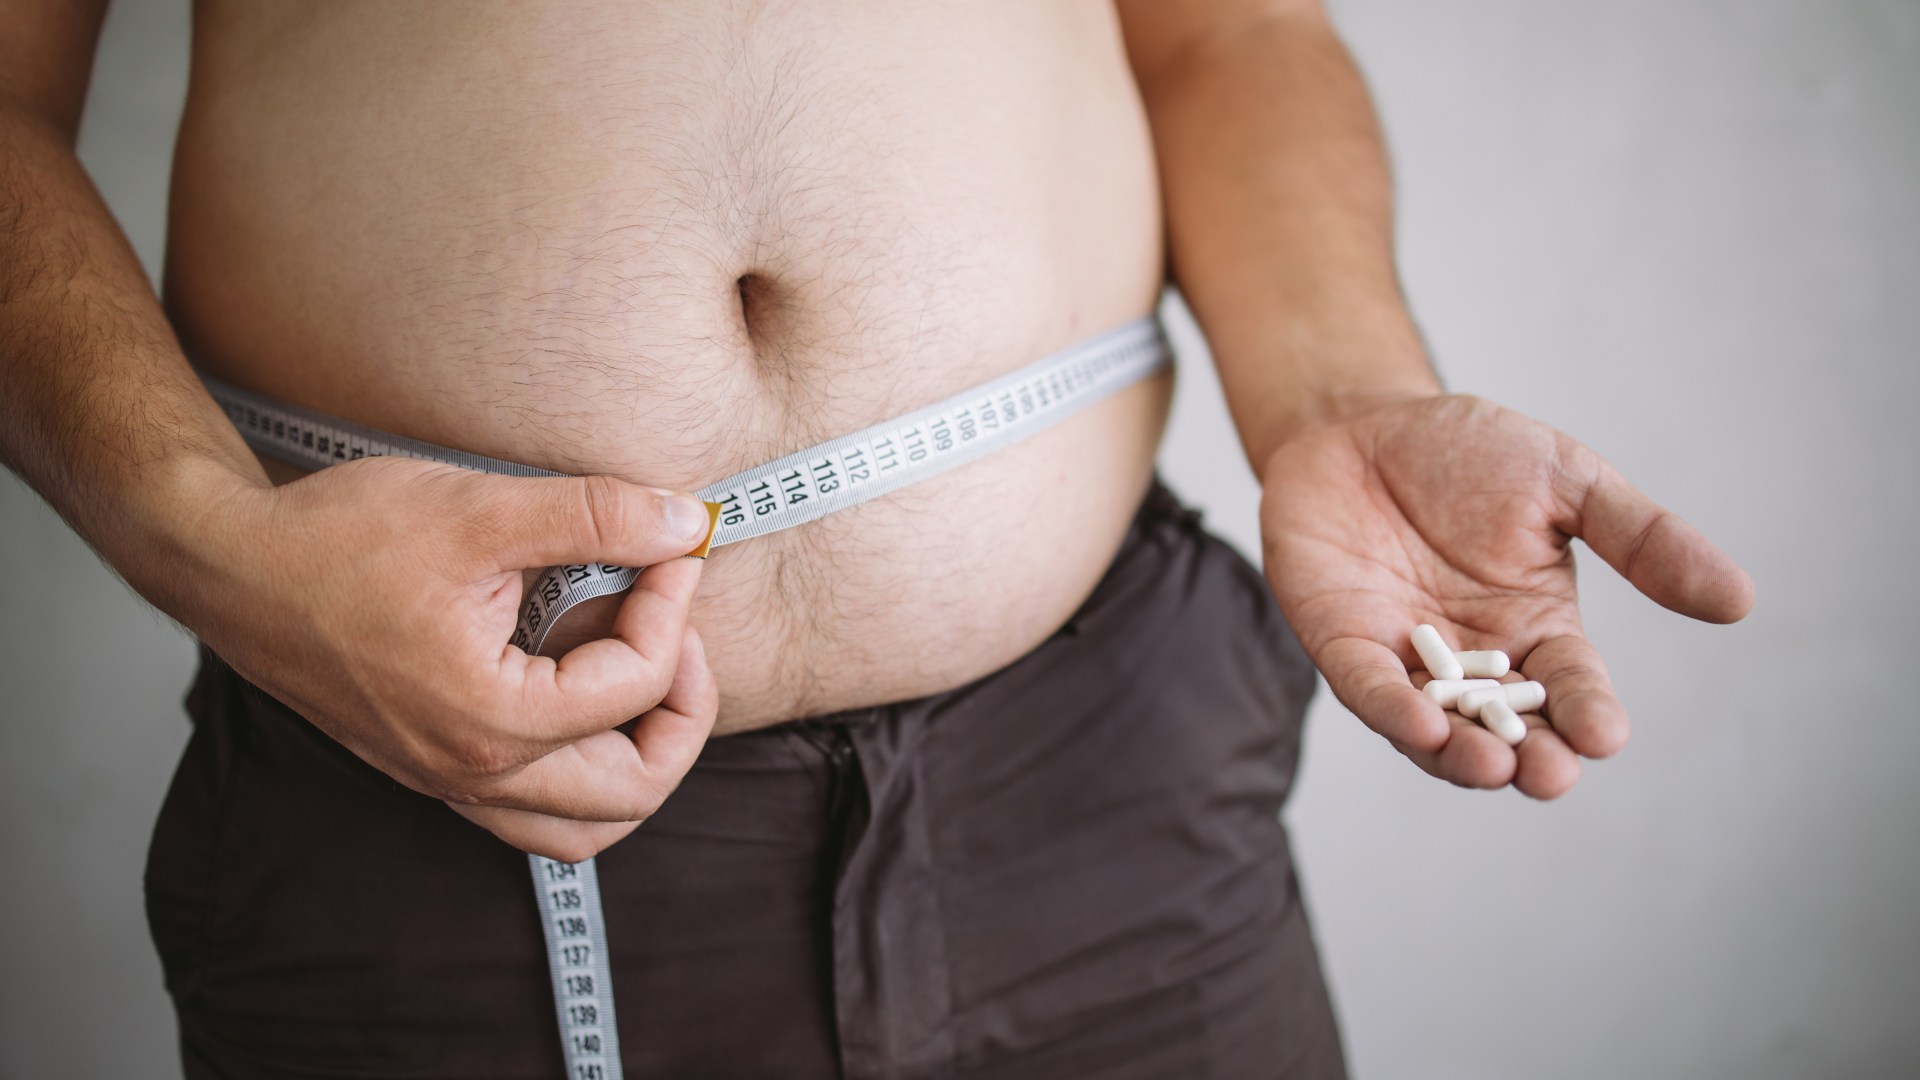 New weight loss pill twice as effective as miracle jab?